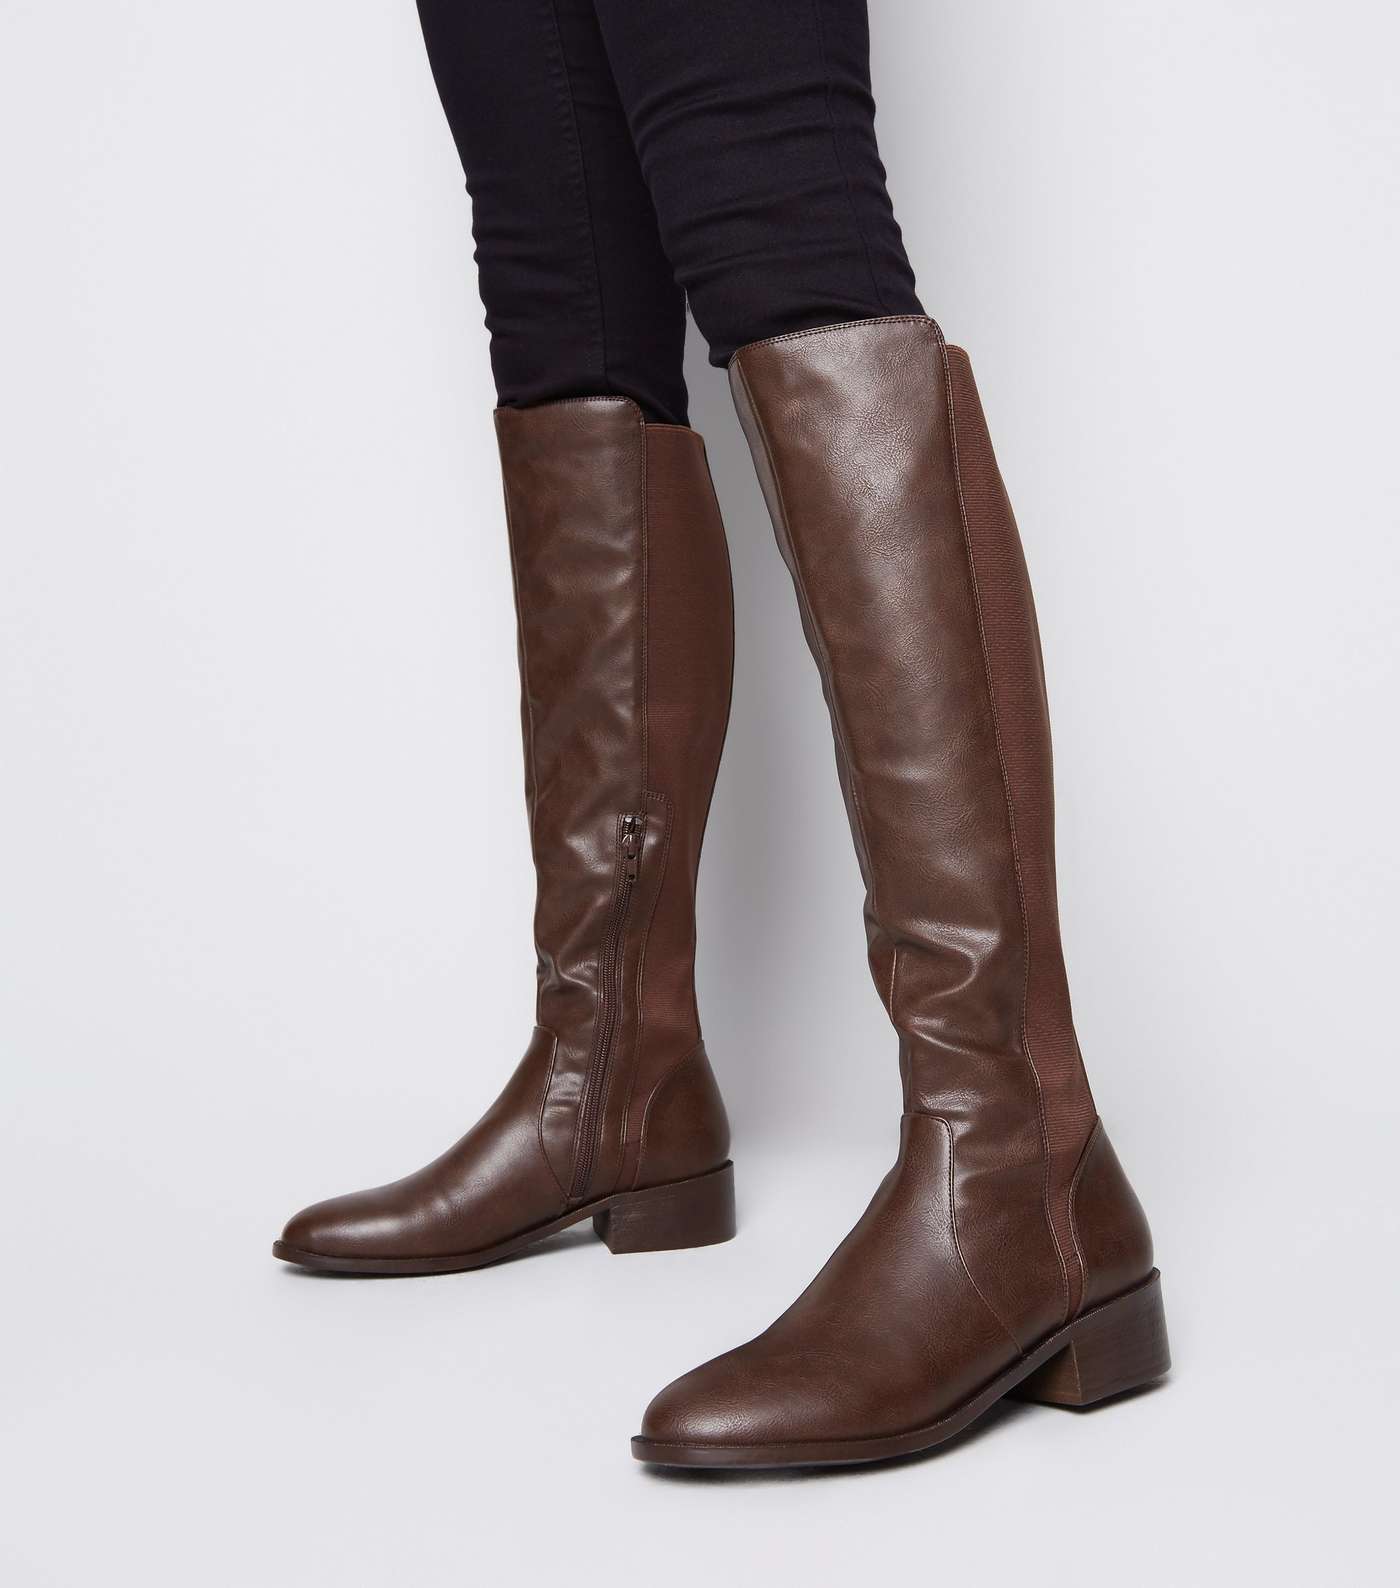 Dark Brown Leather-Look Flat Knee High Boots Image 2